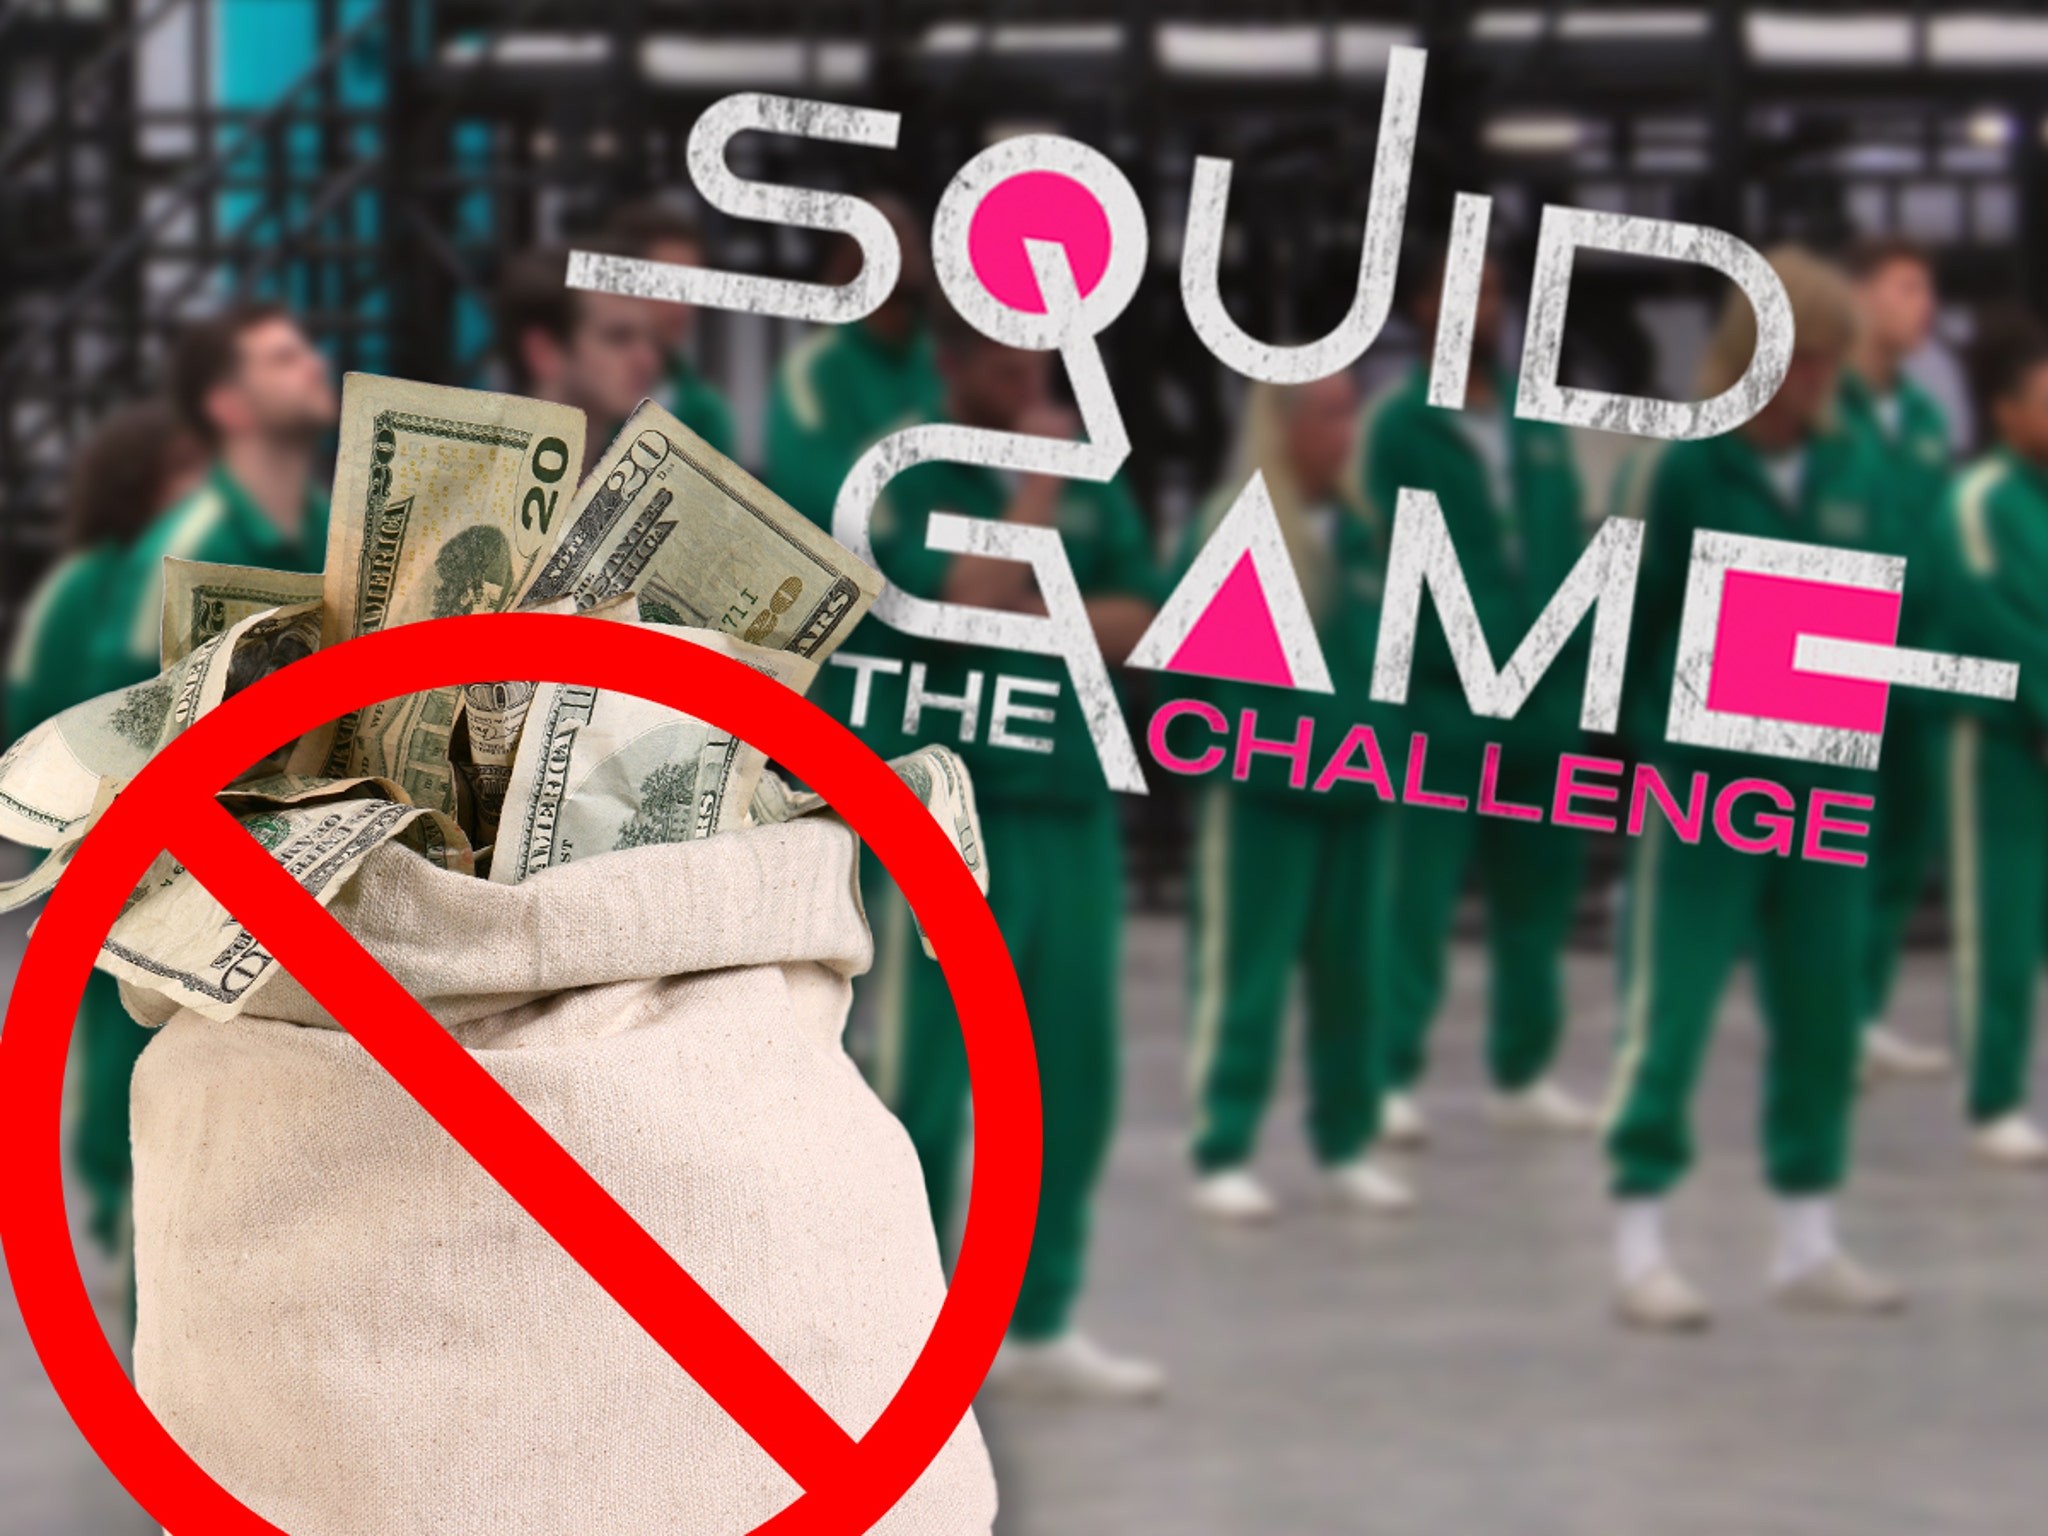 We have a winner in Squid Game: The Challenge - Who took home the